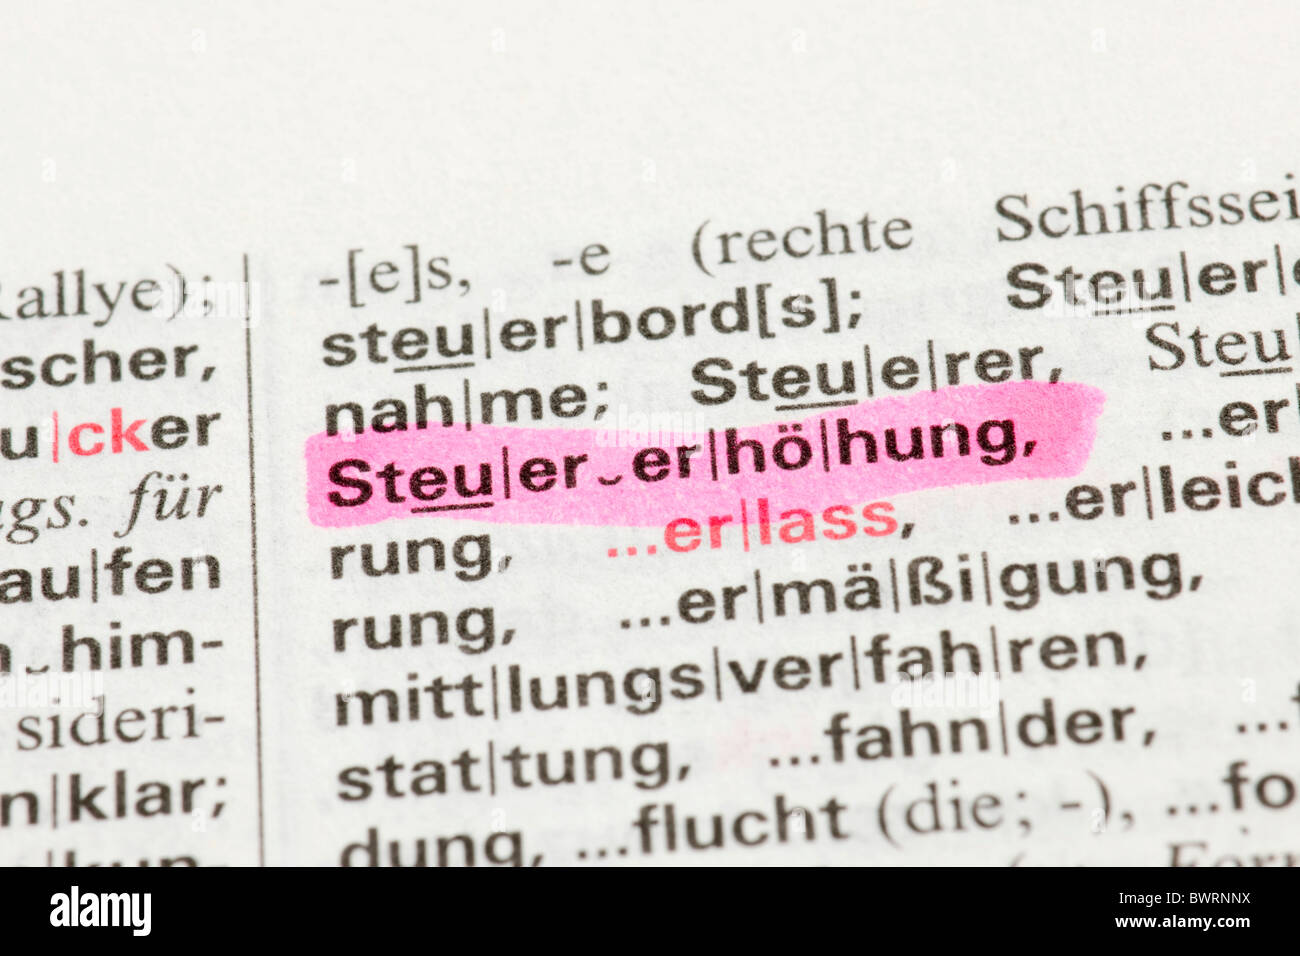 Dictionary entry, Steuererhoehung, German for tax increase Stock Photo